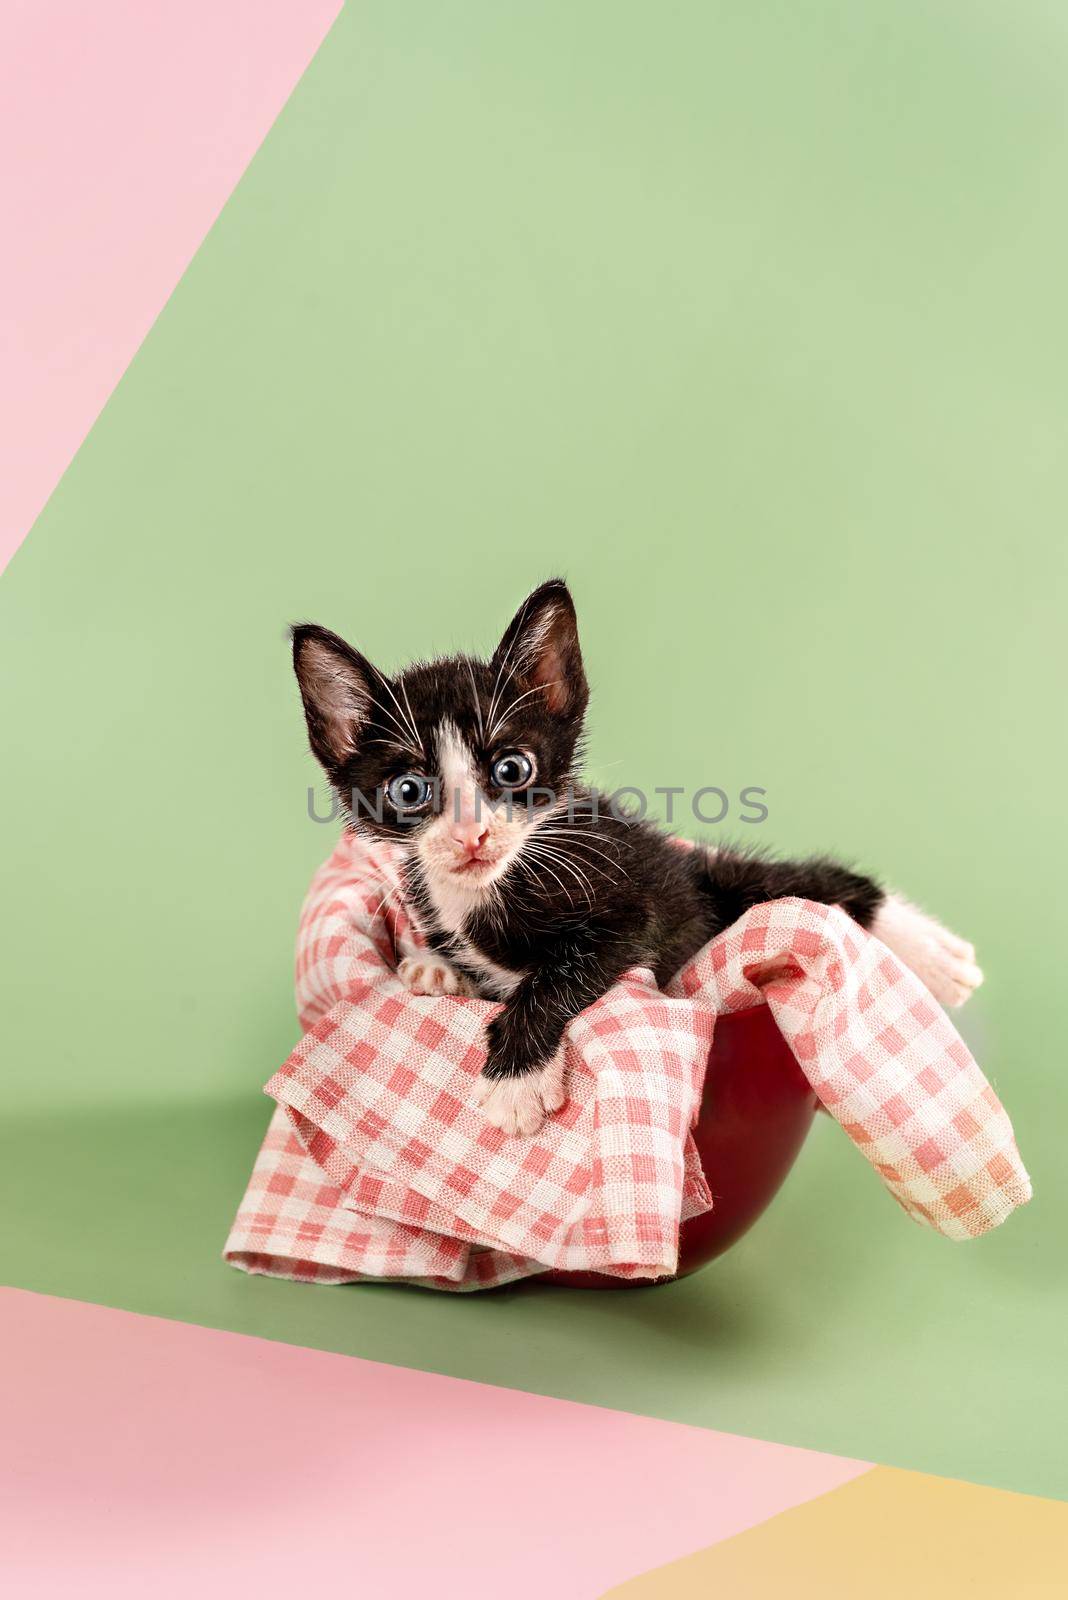 Cute kitten sitting inside cup on green and pink background